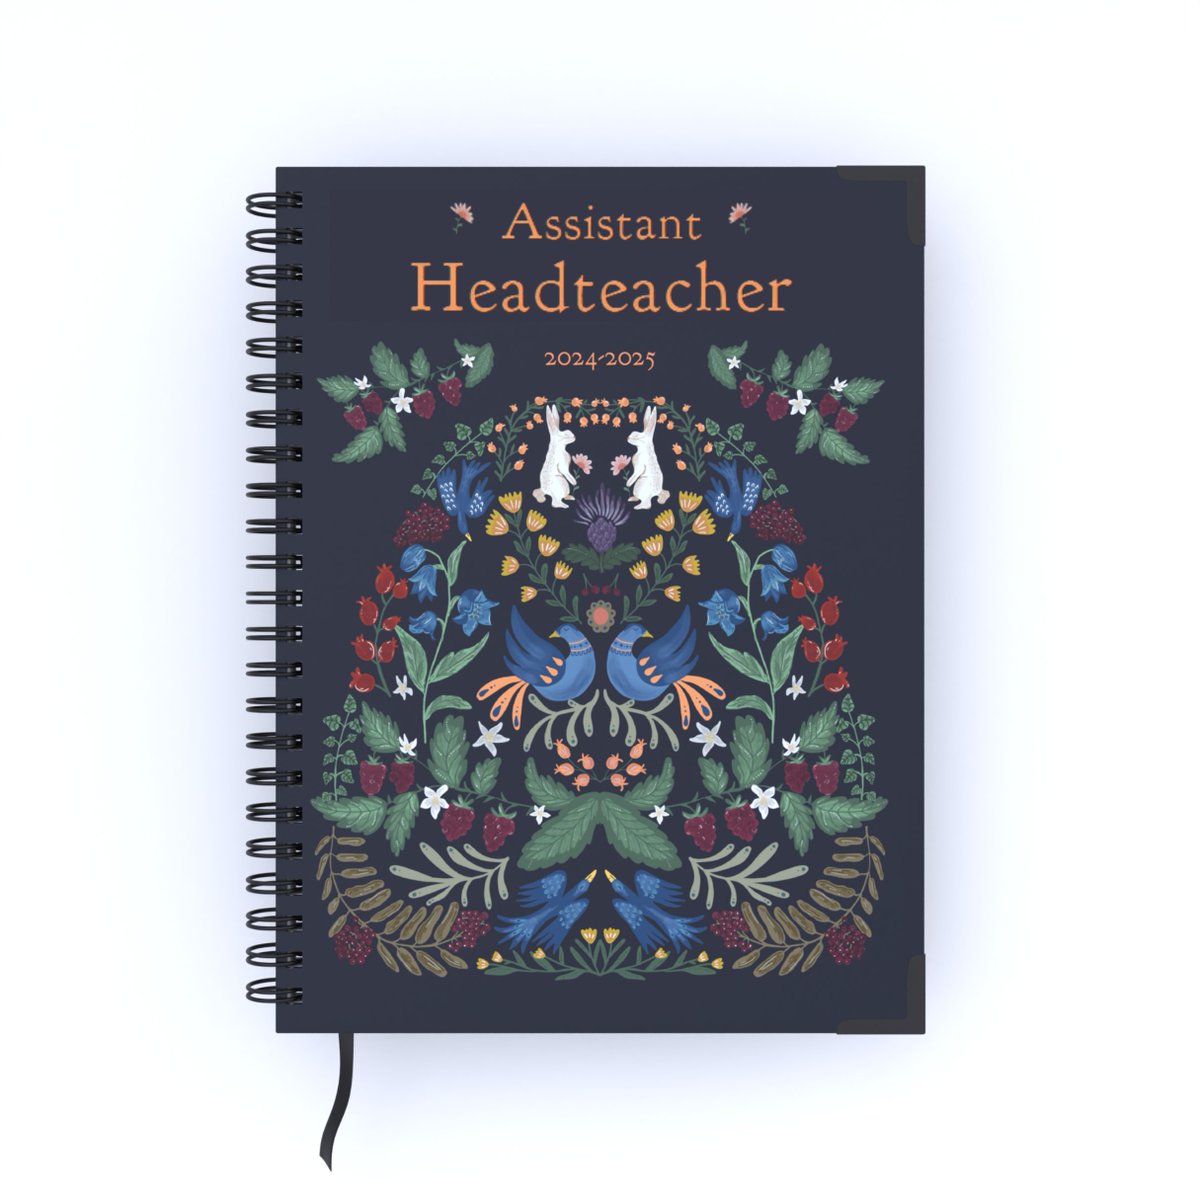 HeadteacherChat Assistant Headteacher Planner! Packed with: SDIP & SEF guidance Teaching & Learning tools Performance management support CPD trackers Reading lists, assembly ideas Governor notes sections Calendar Diary Pre Order: headteacherchat.com/planners/assis…